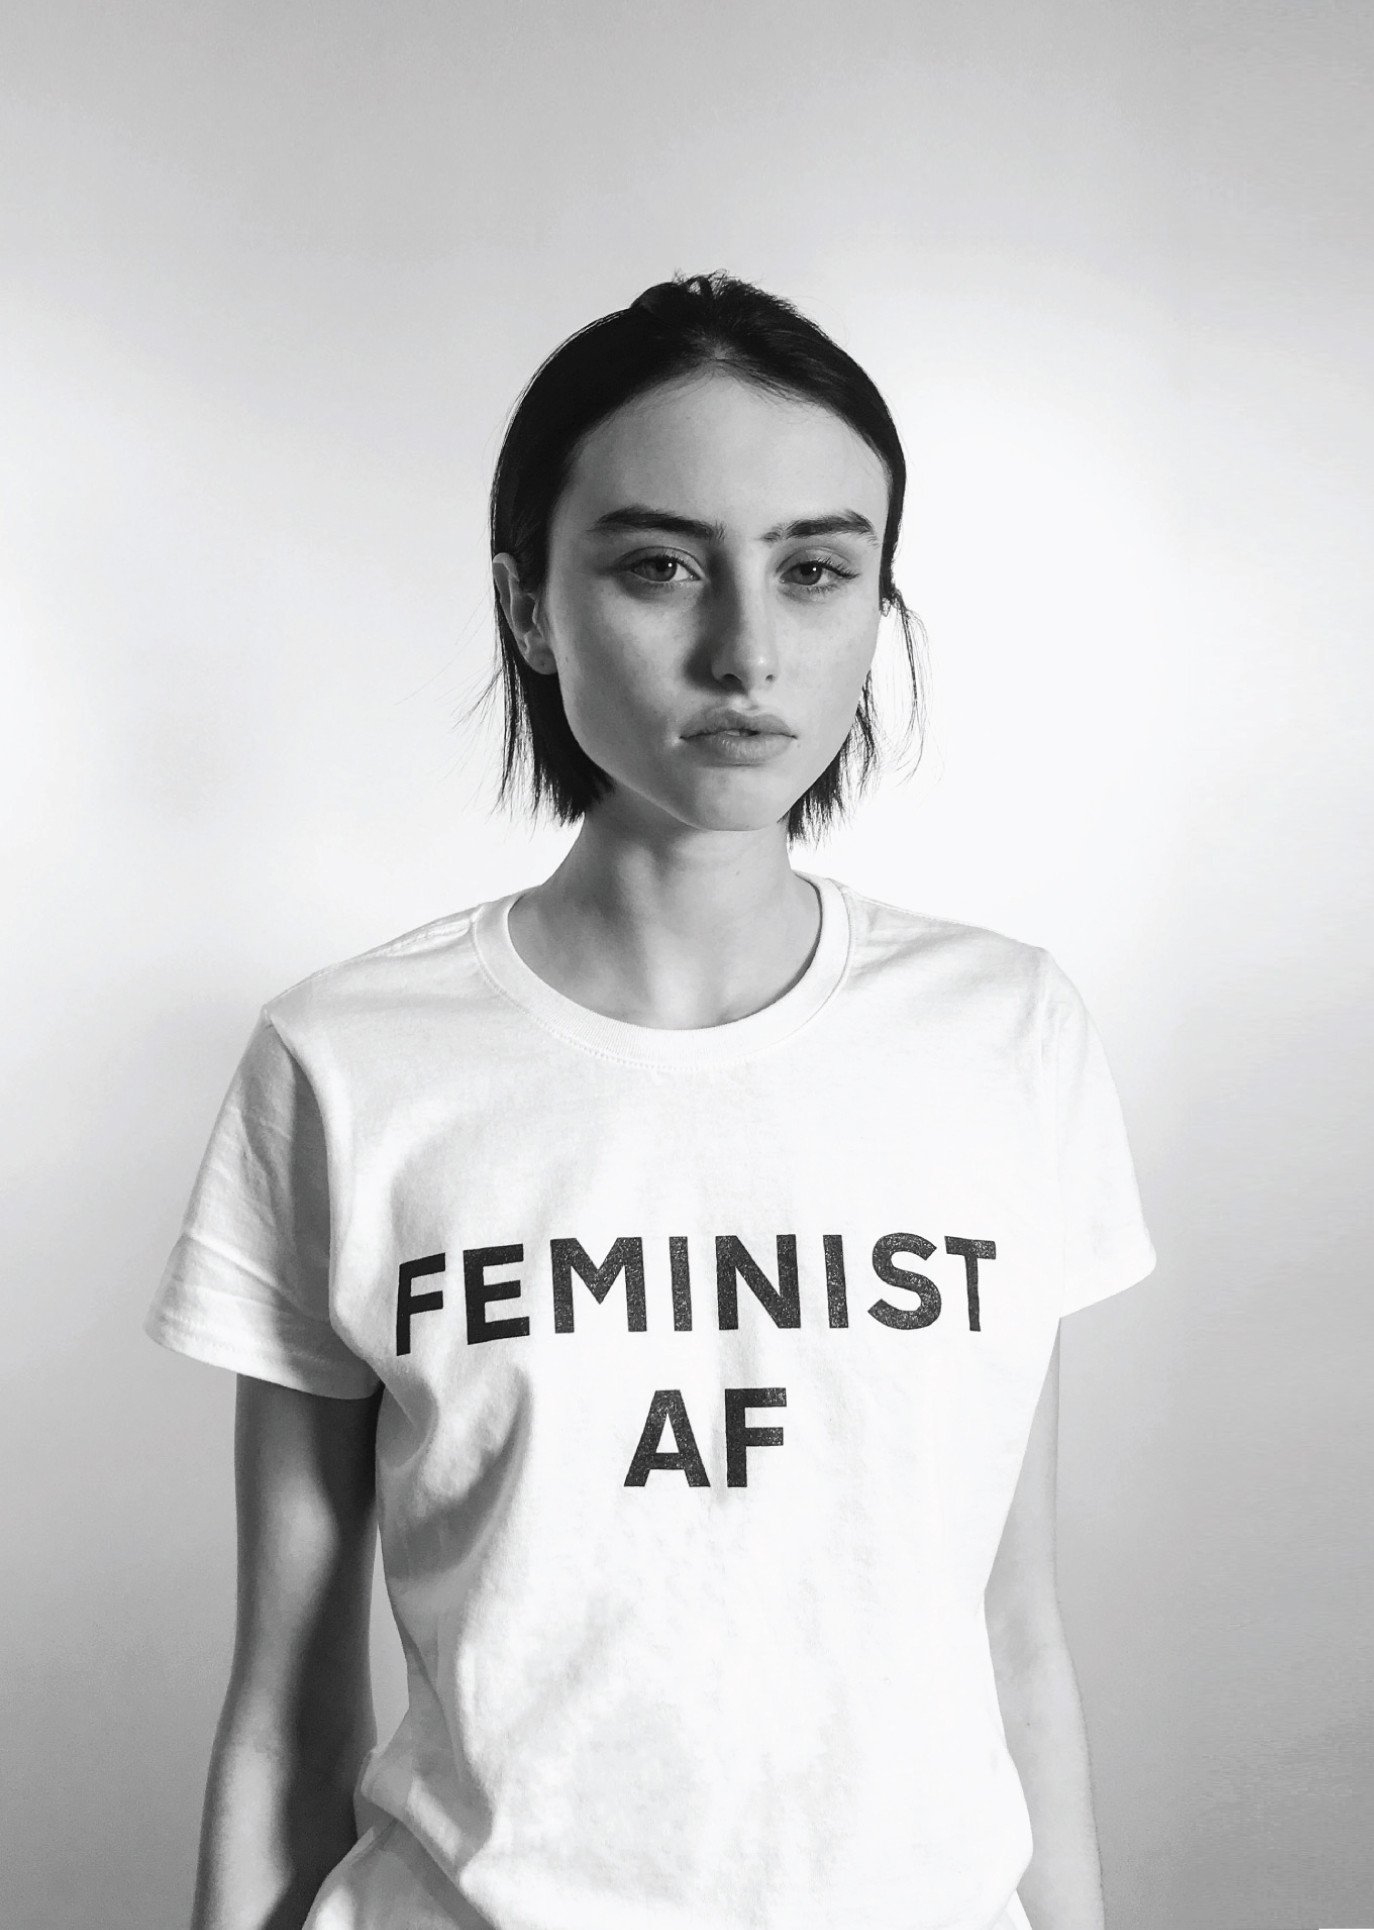 Feminist AF - simple and effective